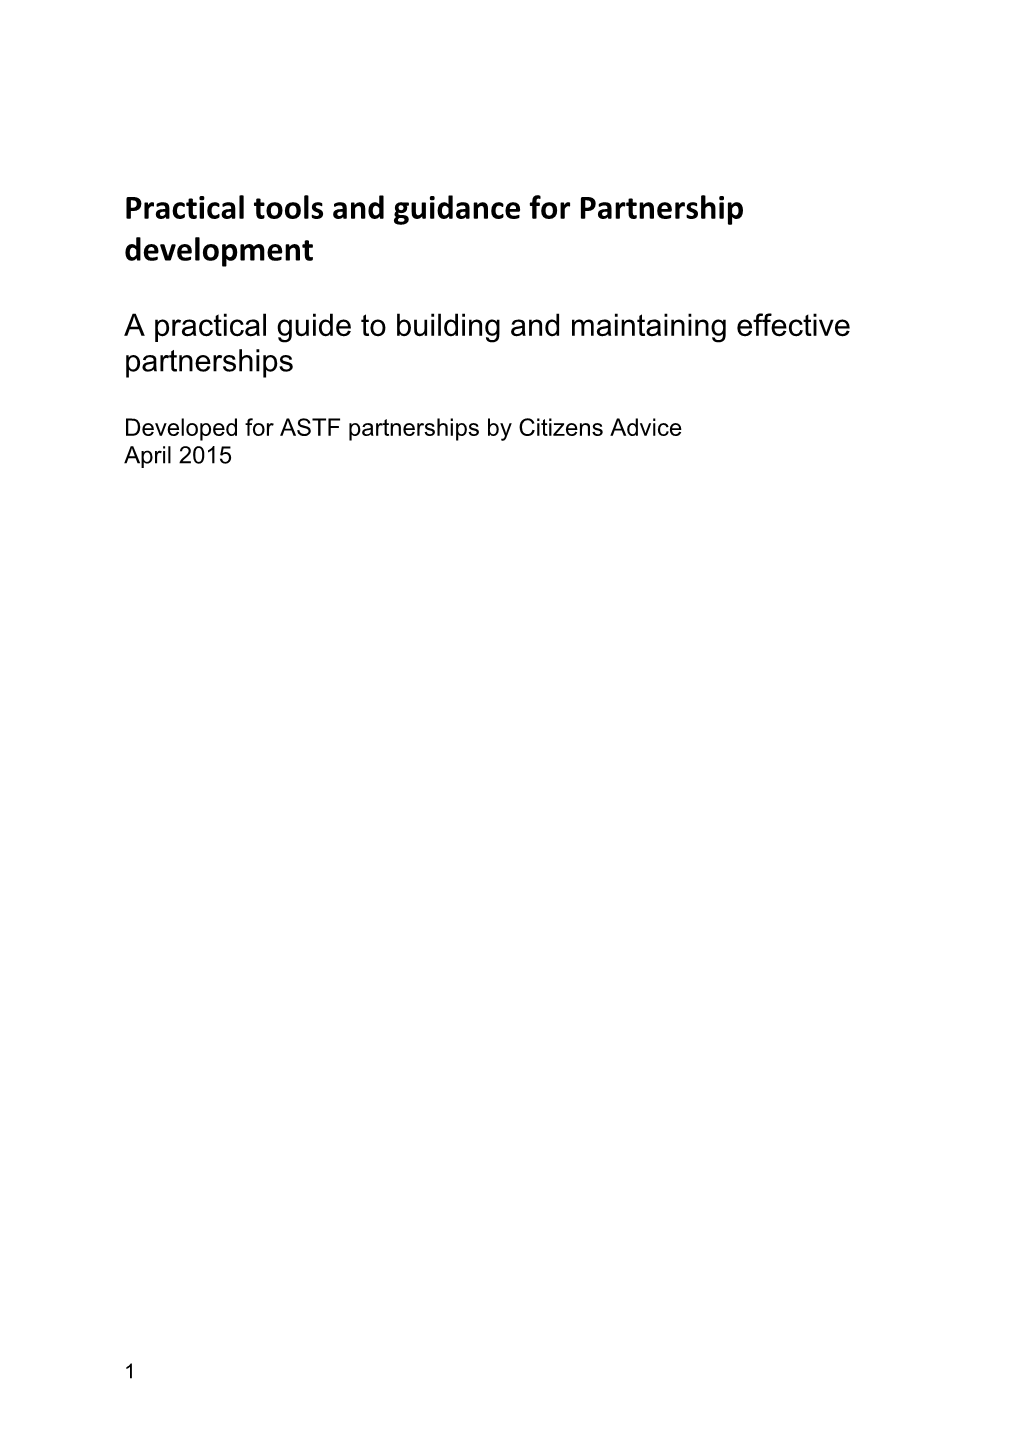 Practical Tools and Guidance for Partnership Development